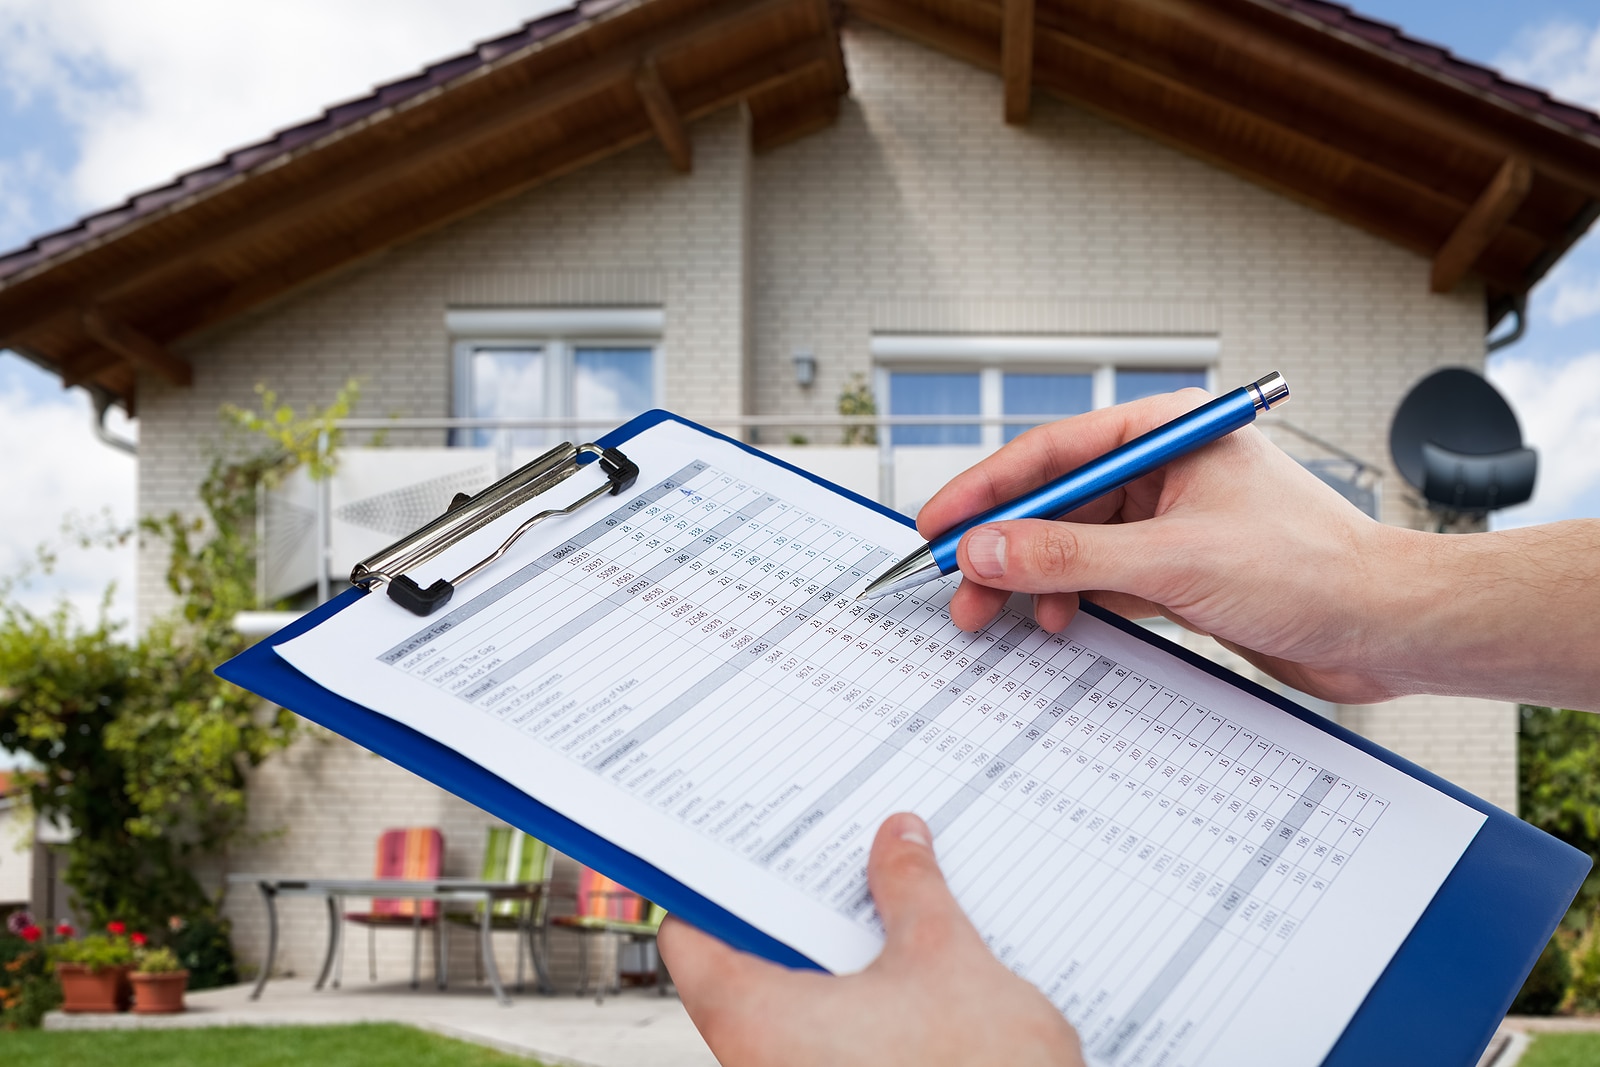 Request Home Inspection To Know Your Homes Life Expectancy in Jacksonville, FL